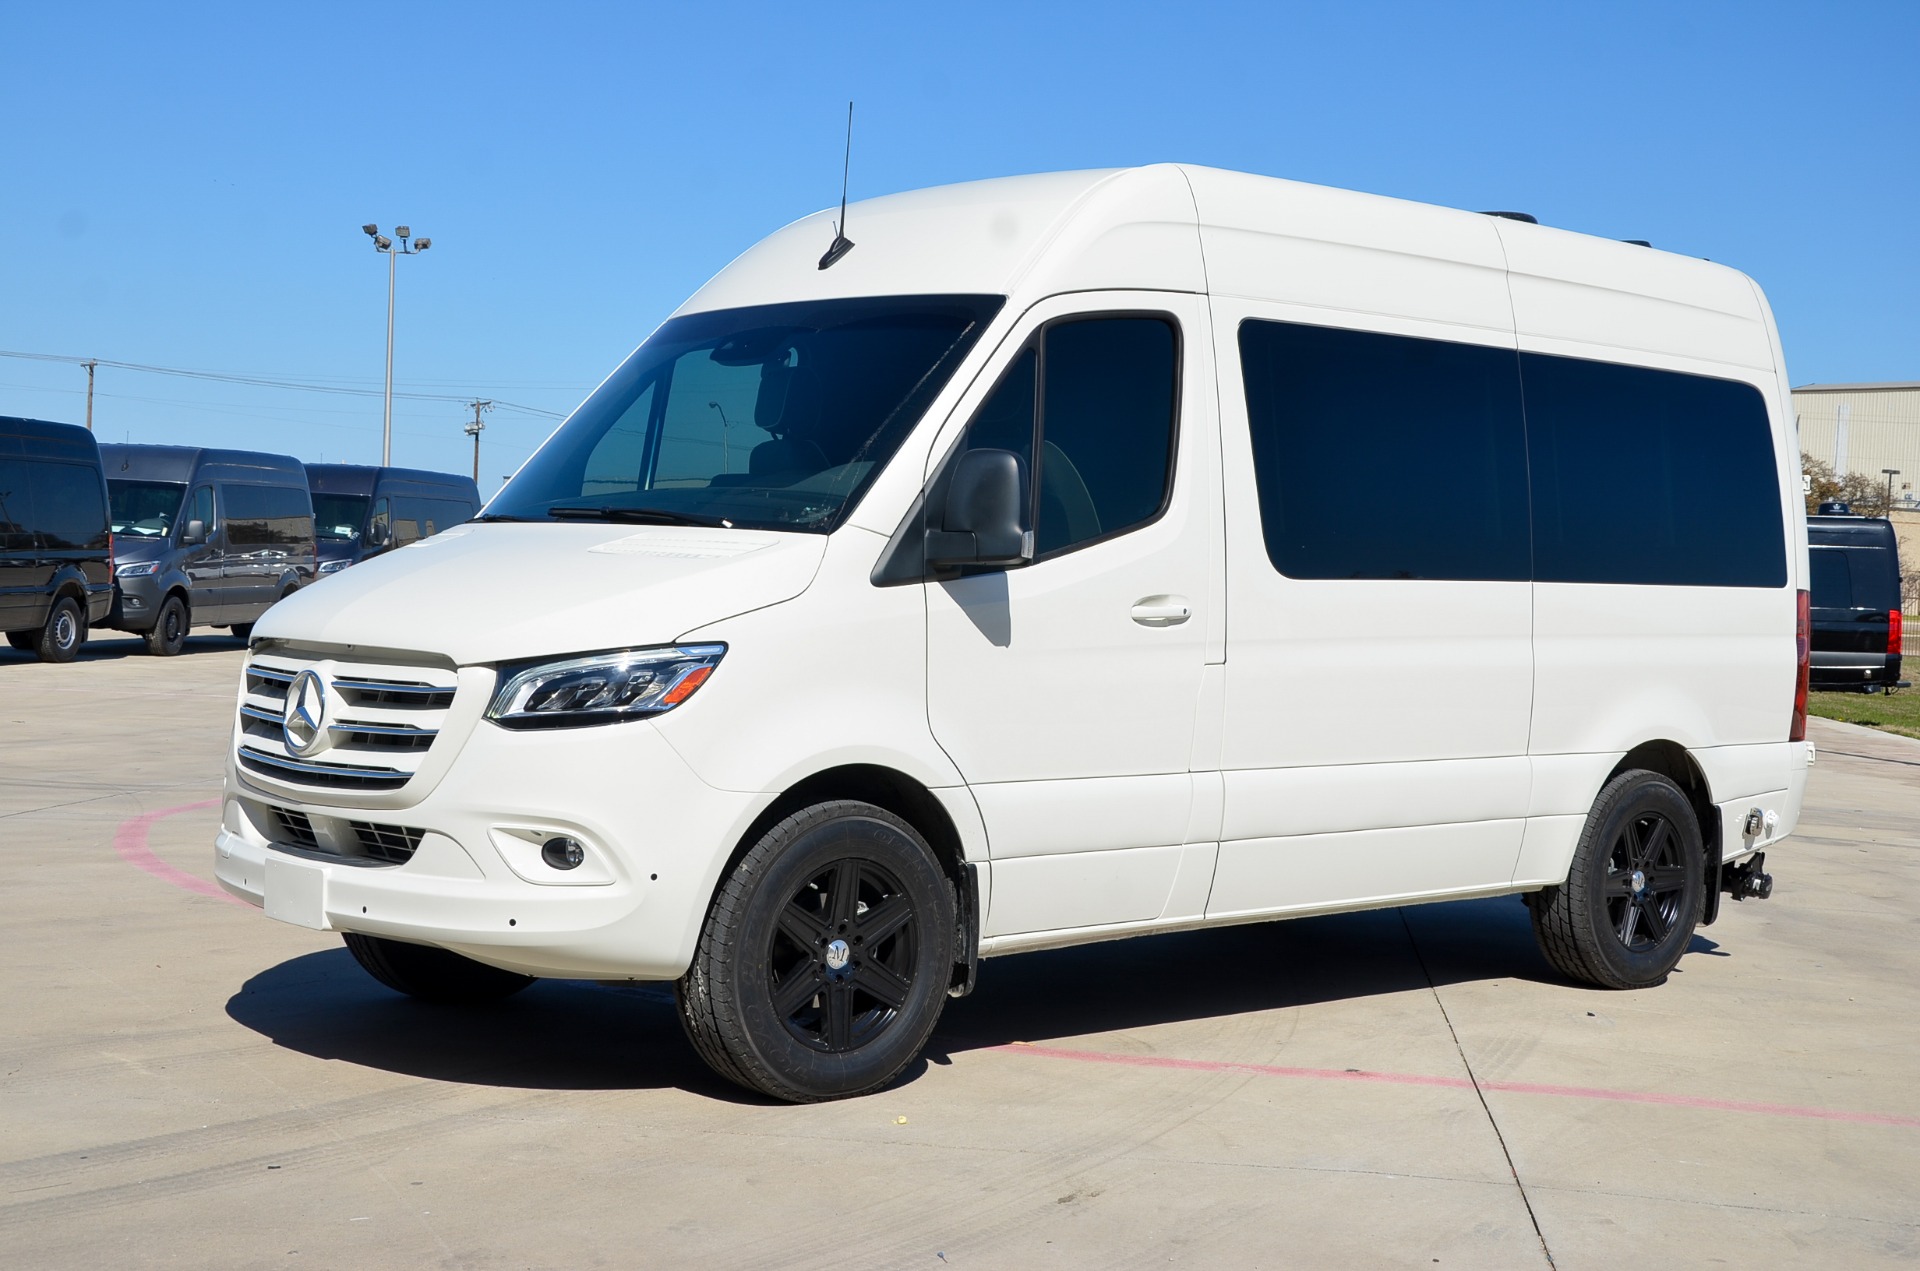 New 2022 Mercedes-Benz Sprinter 144 Day Lounge D6 2500 For Sale (Sold) |  Iconic Sprinters Stock #3